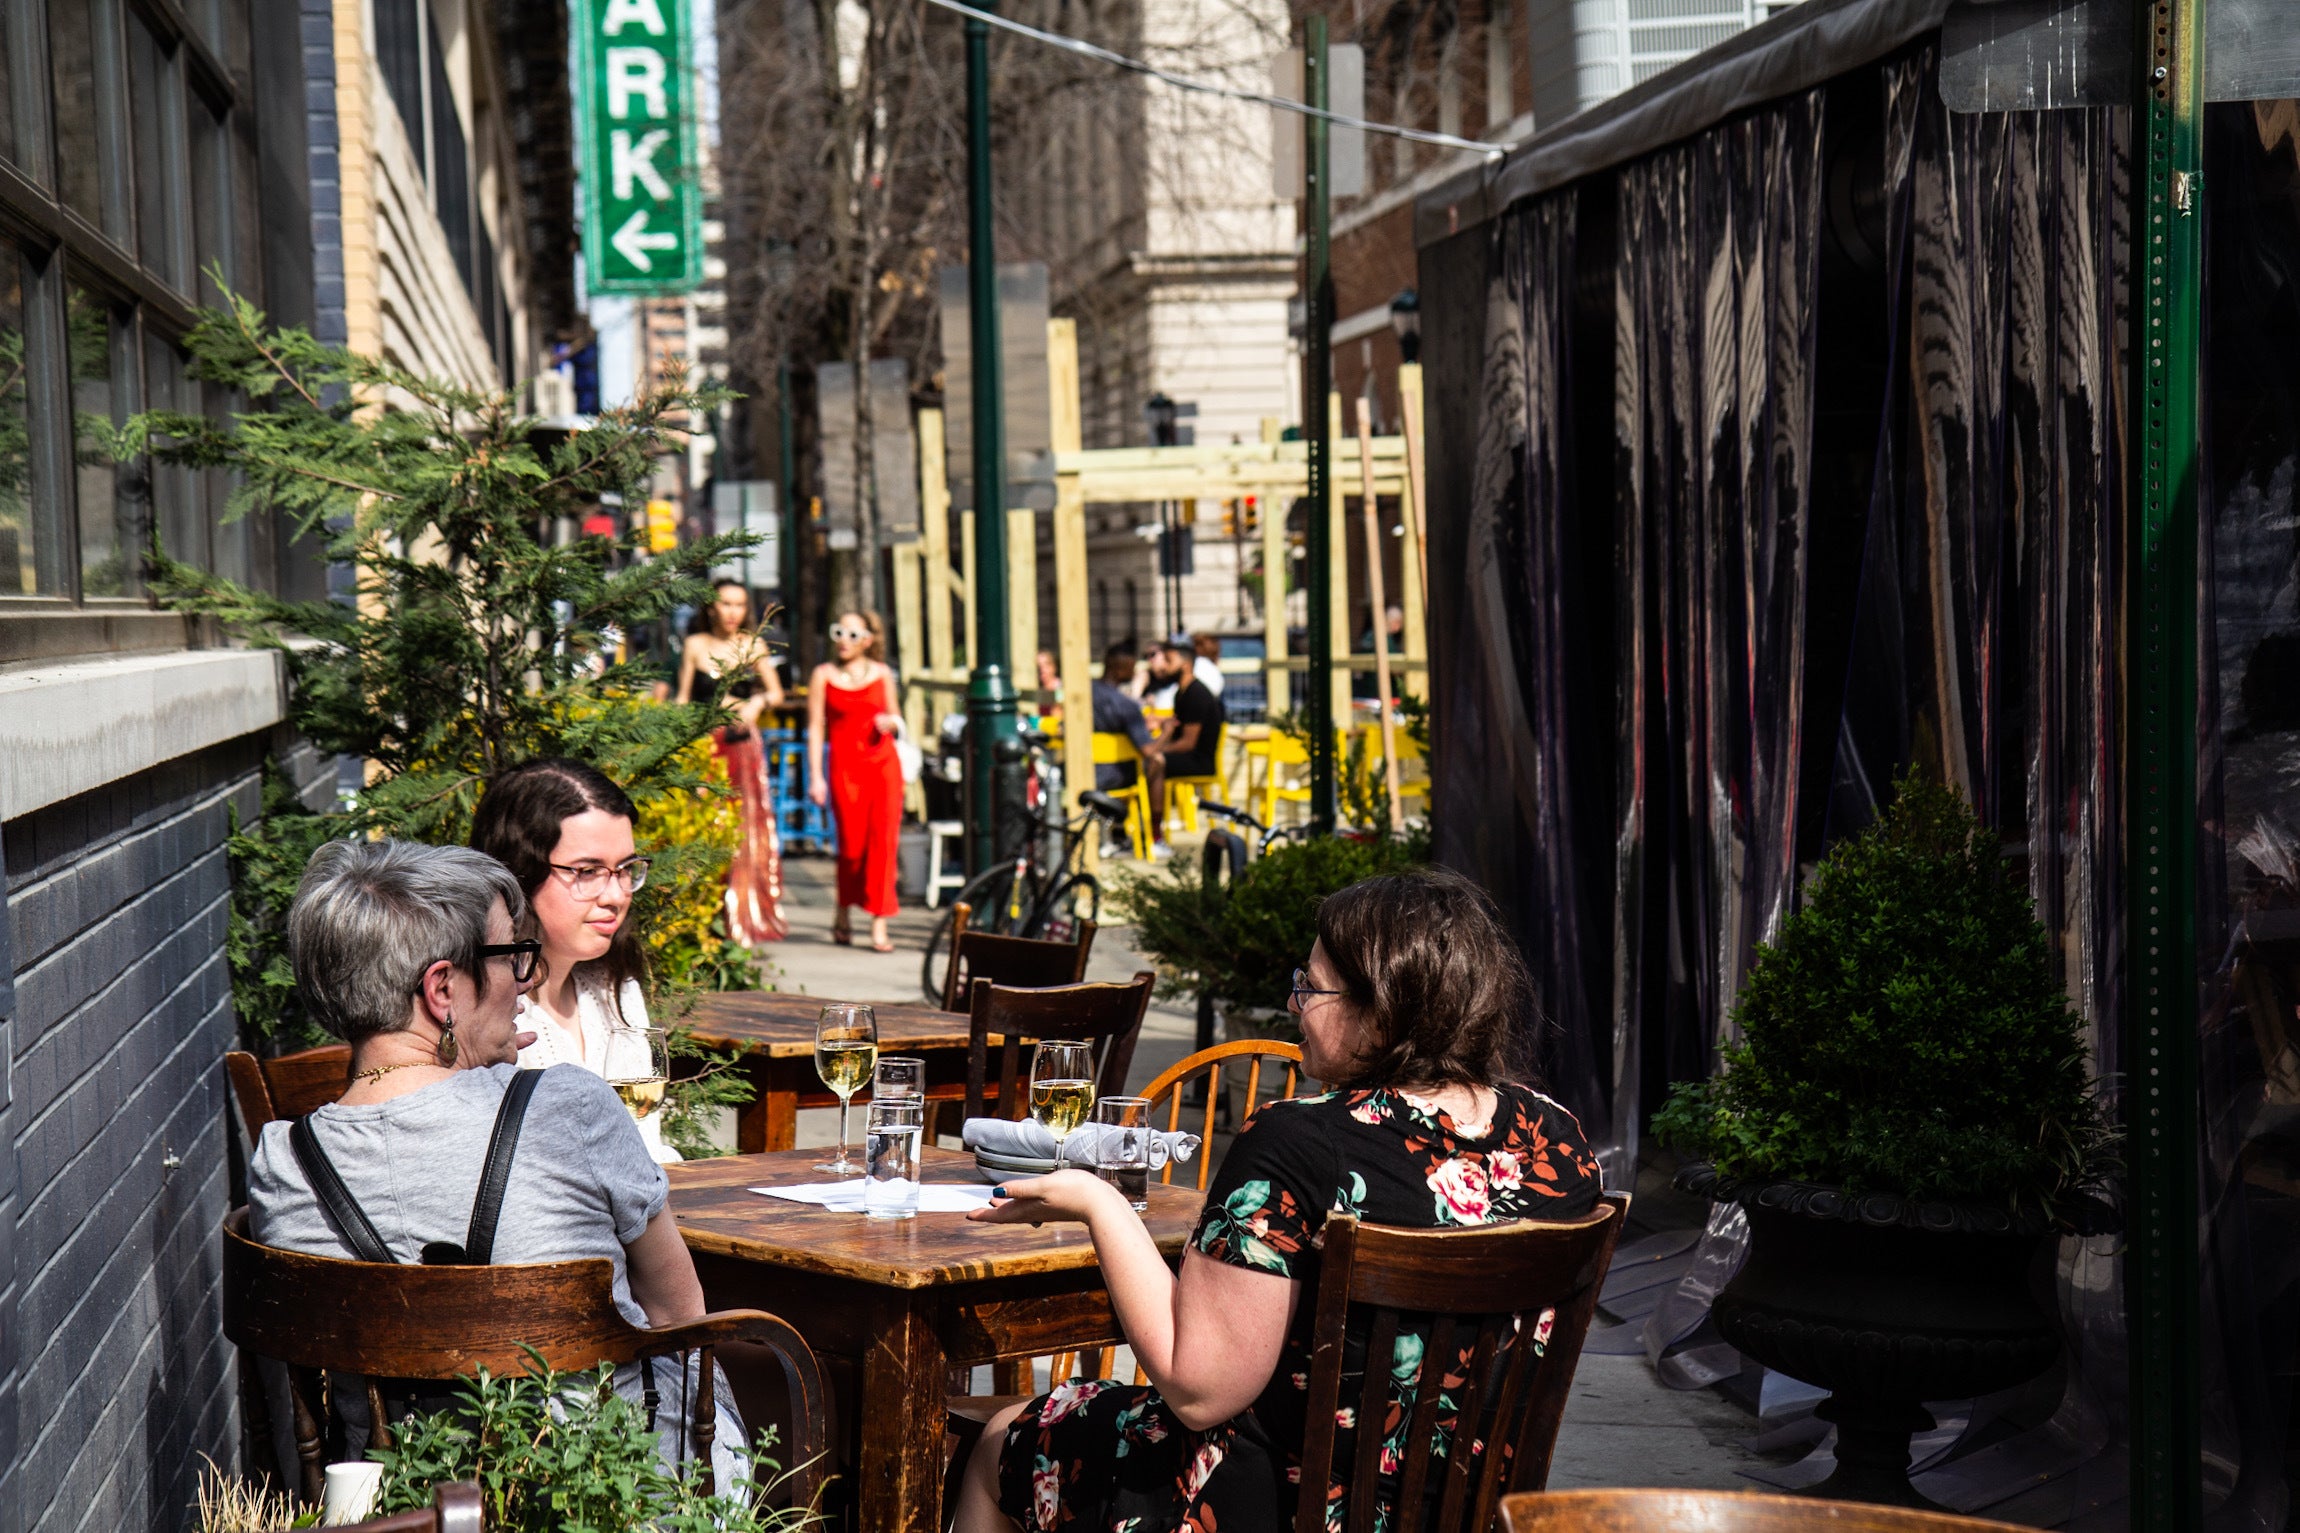 The 1500-1600 block of Sansom Street in Center City is closed for outdoor dining. (Kimberly Paynter/WHYY)